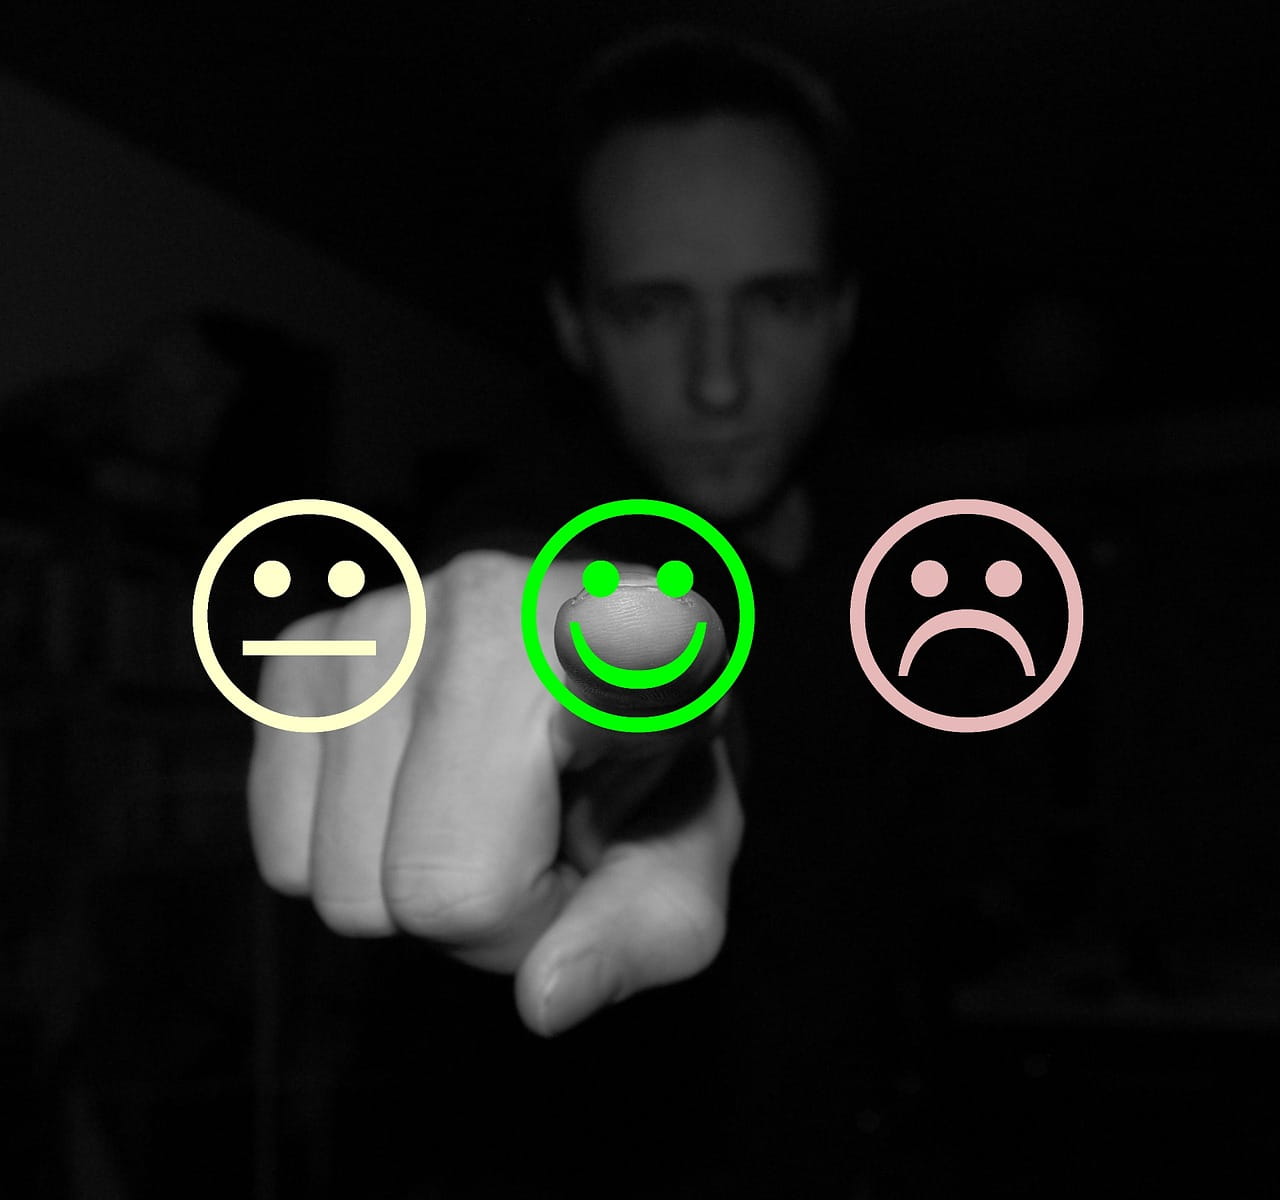 picture of a man completing onscreen feedback and three faces depict available choices.